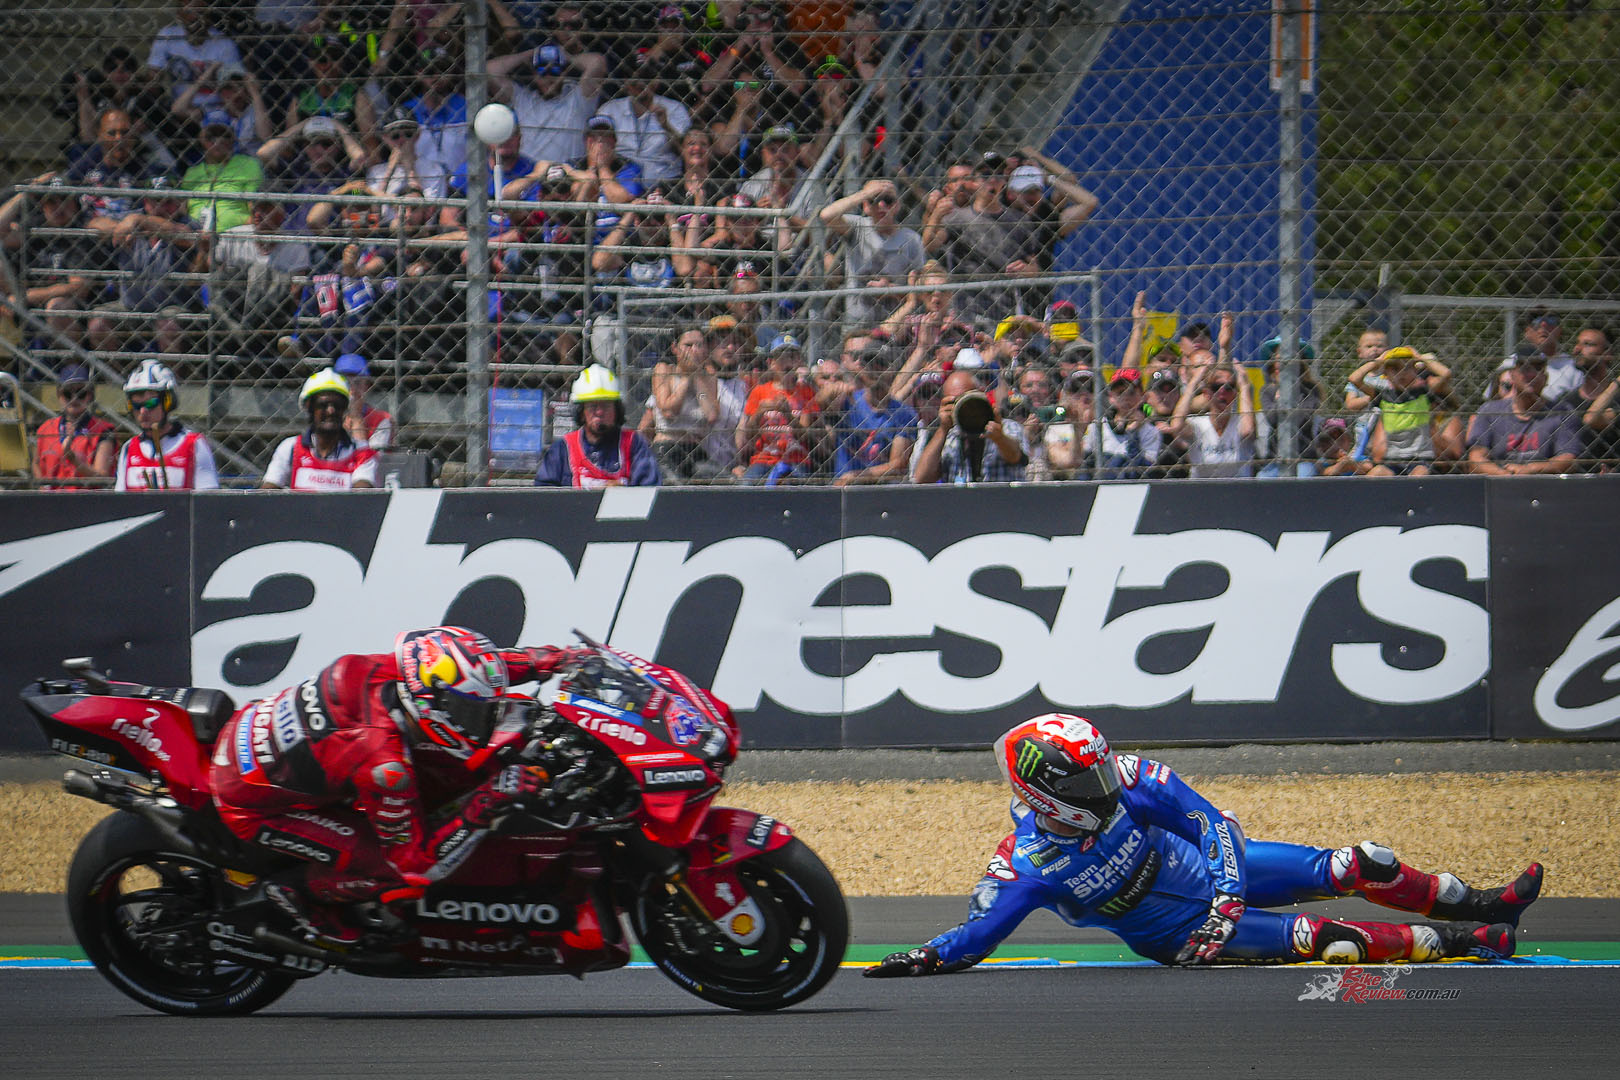 With speculation rife that Jack Miller could be losing his factory Ducati ride at the end of the season, the Australian's brilliant second at Le Mans went some way towards blunting those rumours.